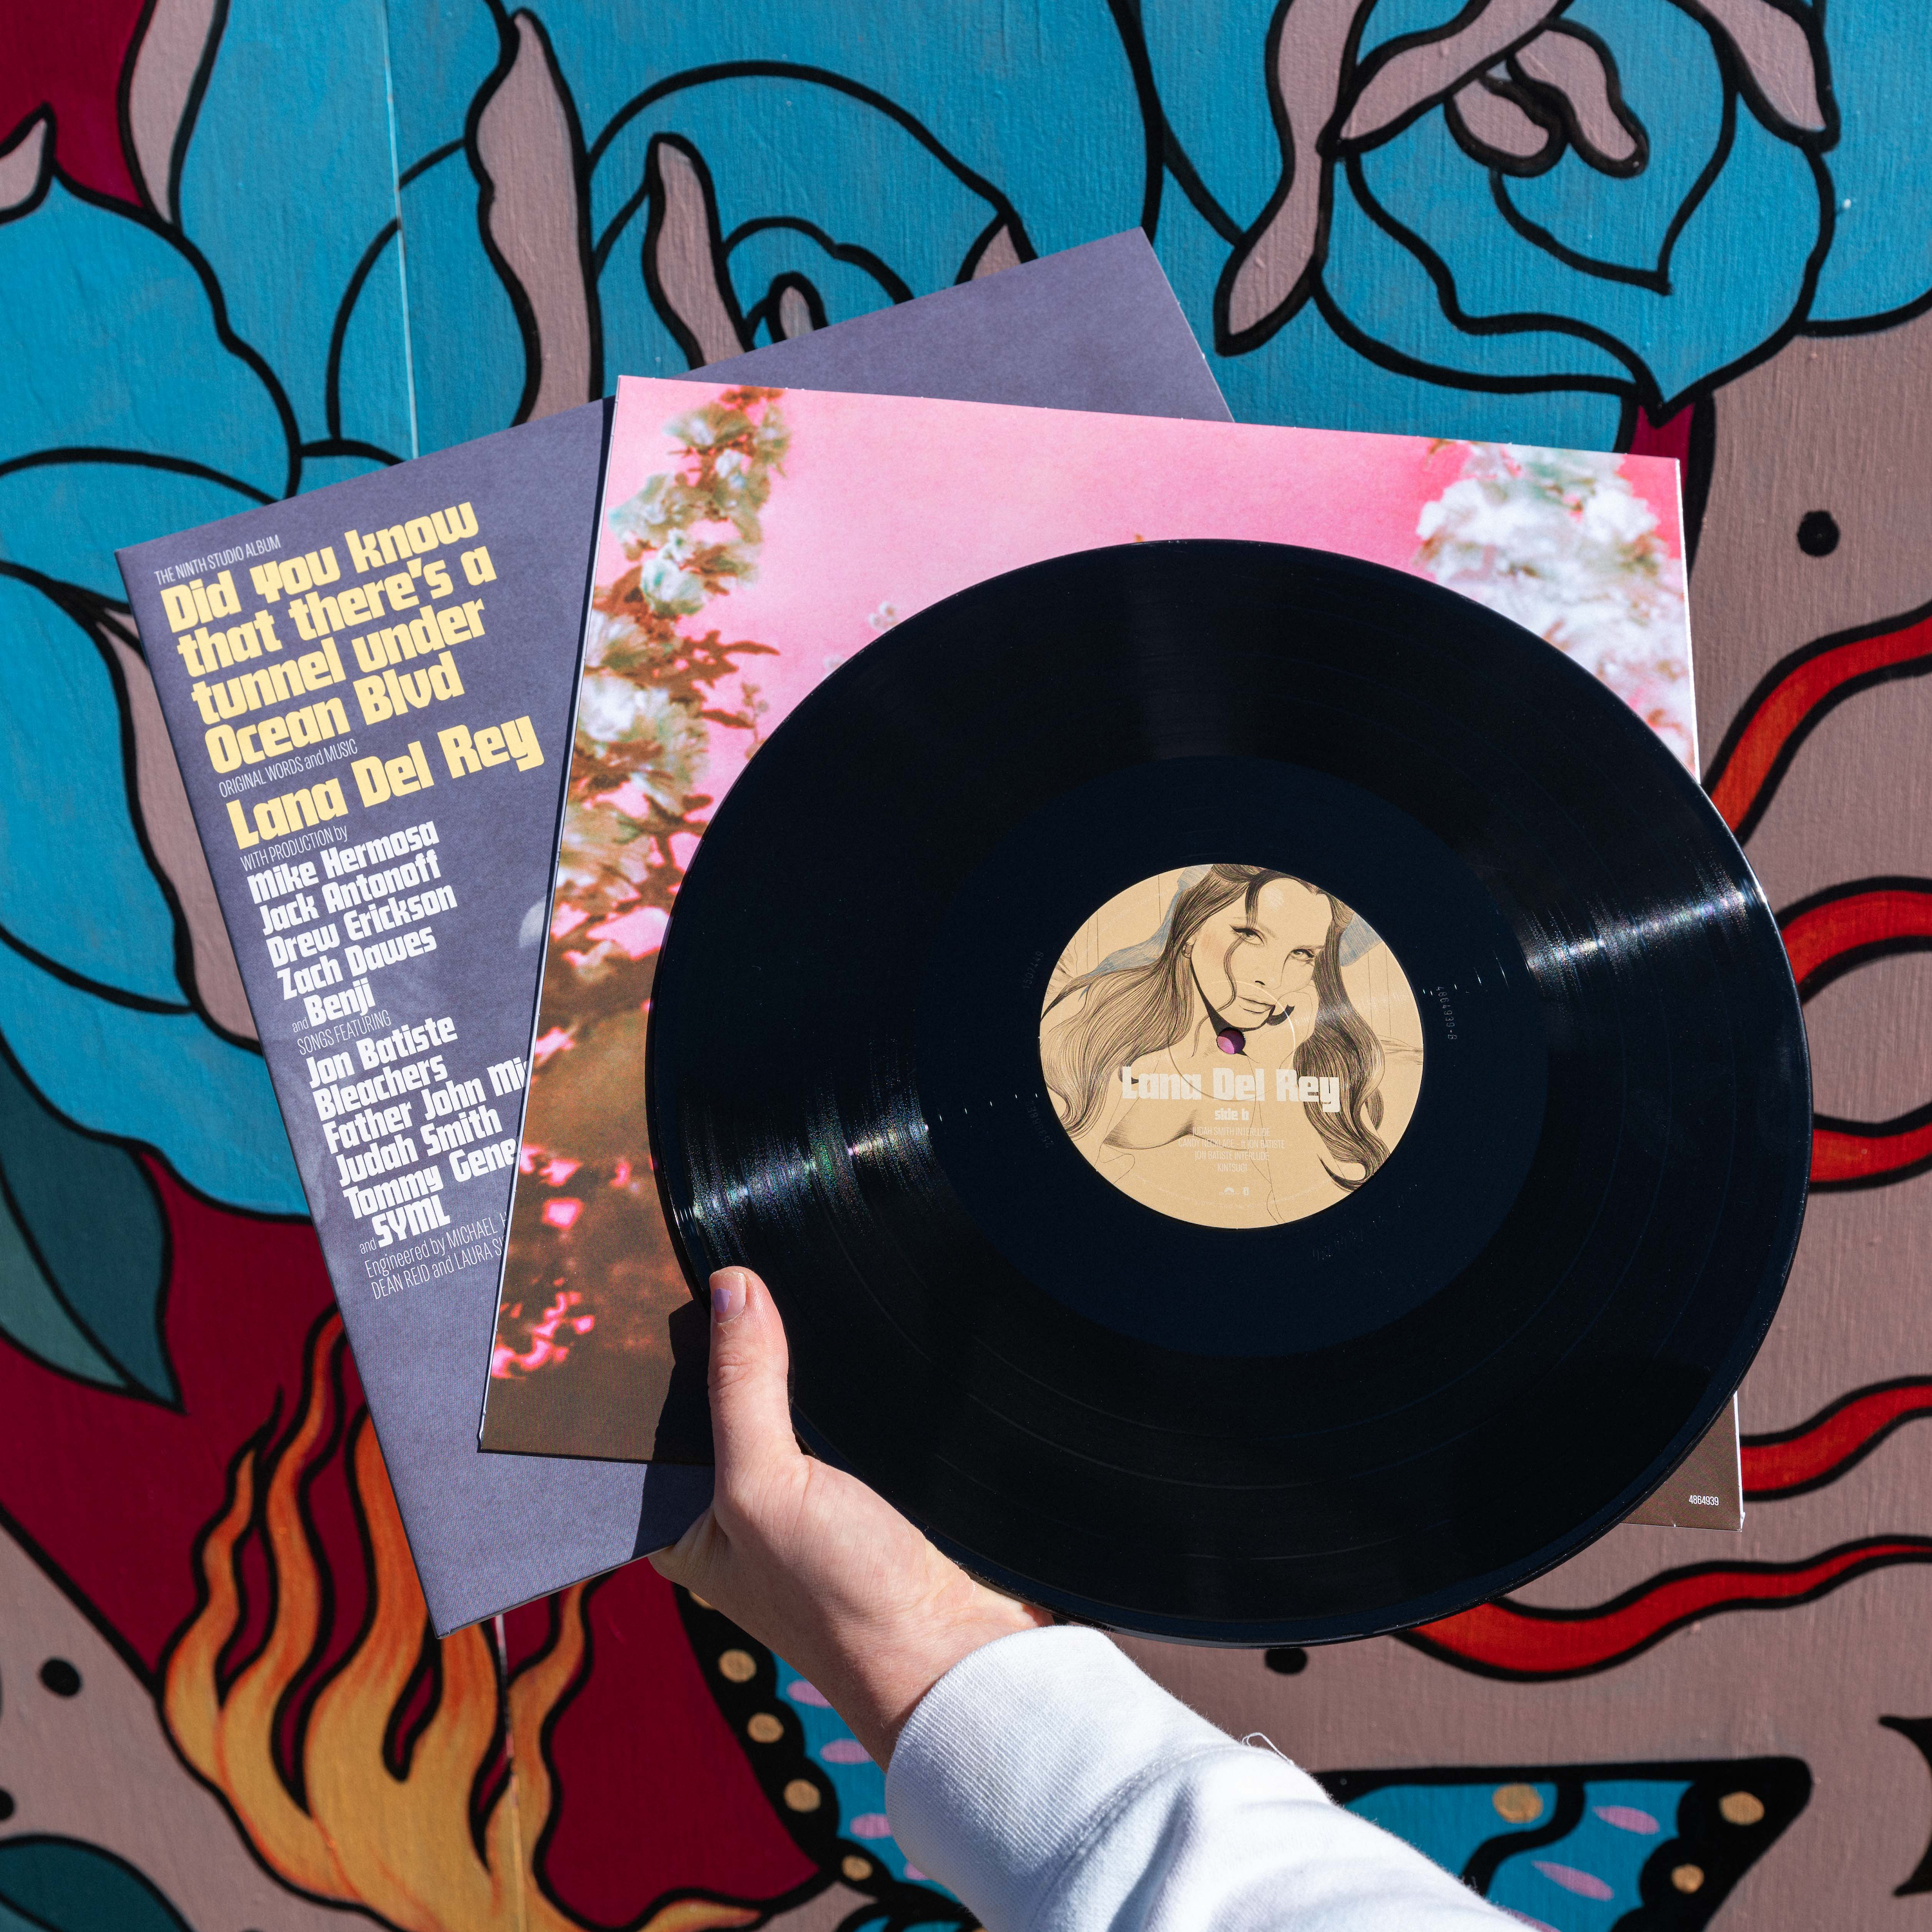 Lana Del Rey Did You Know That Theres A Tunnel Under Ocean Vinyl Blvd Pink  Vinyl